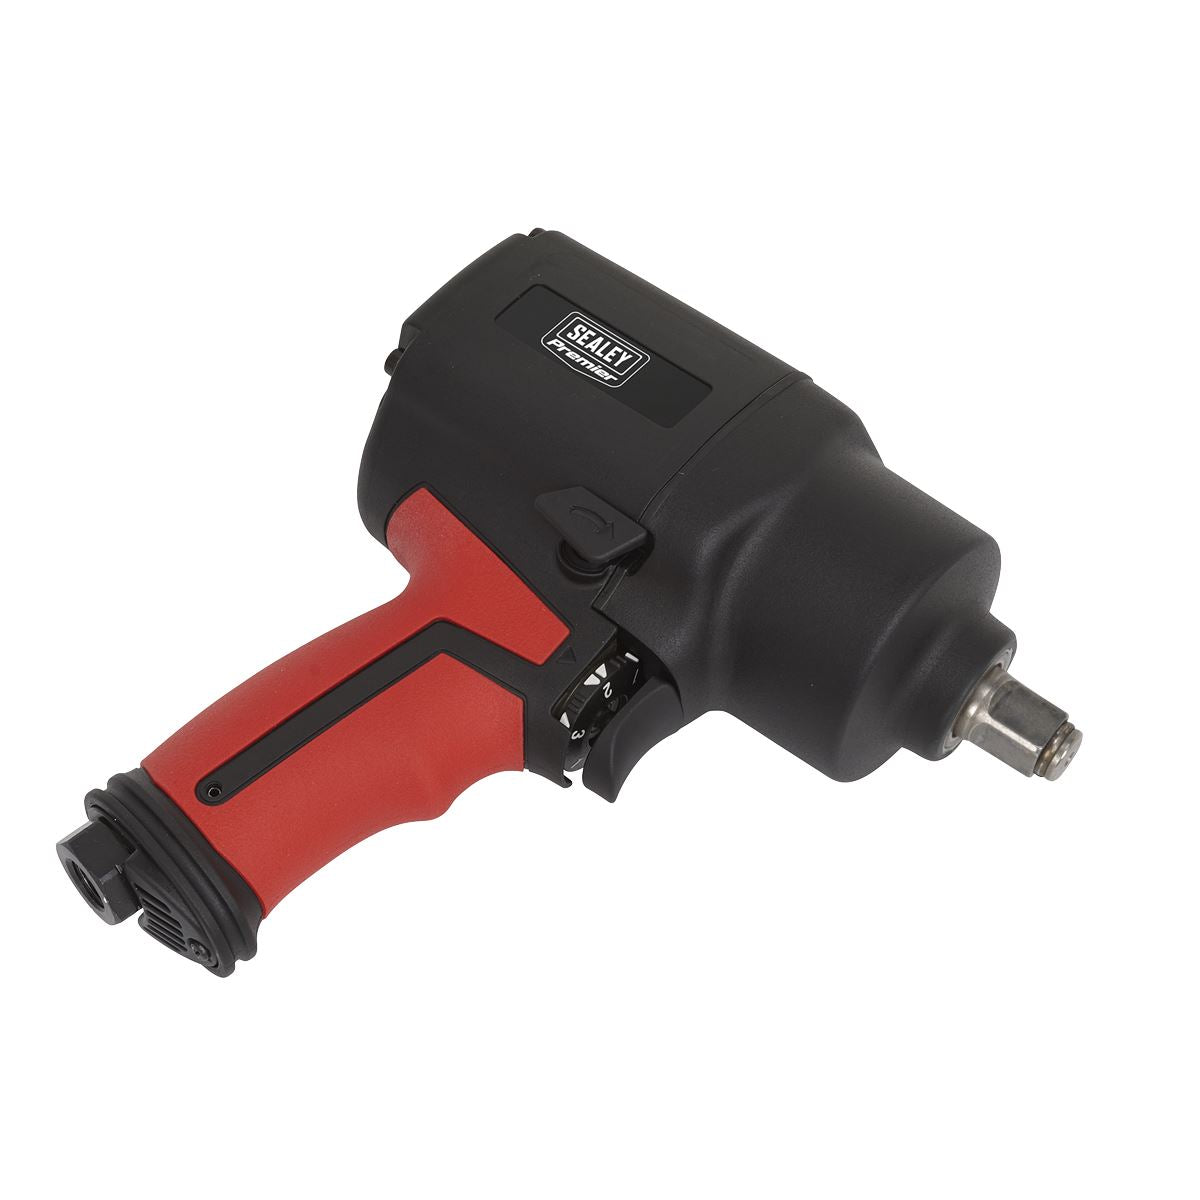 Sealey Premier Air Impact Wrench 1/2"Sq Drive Twin Hammer